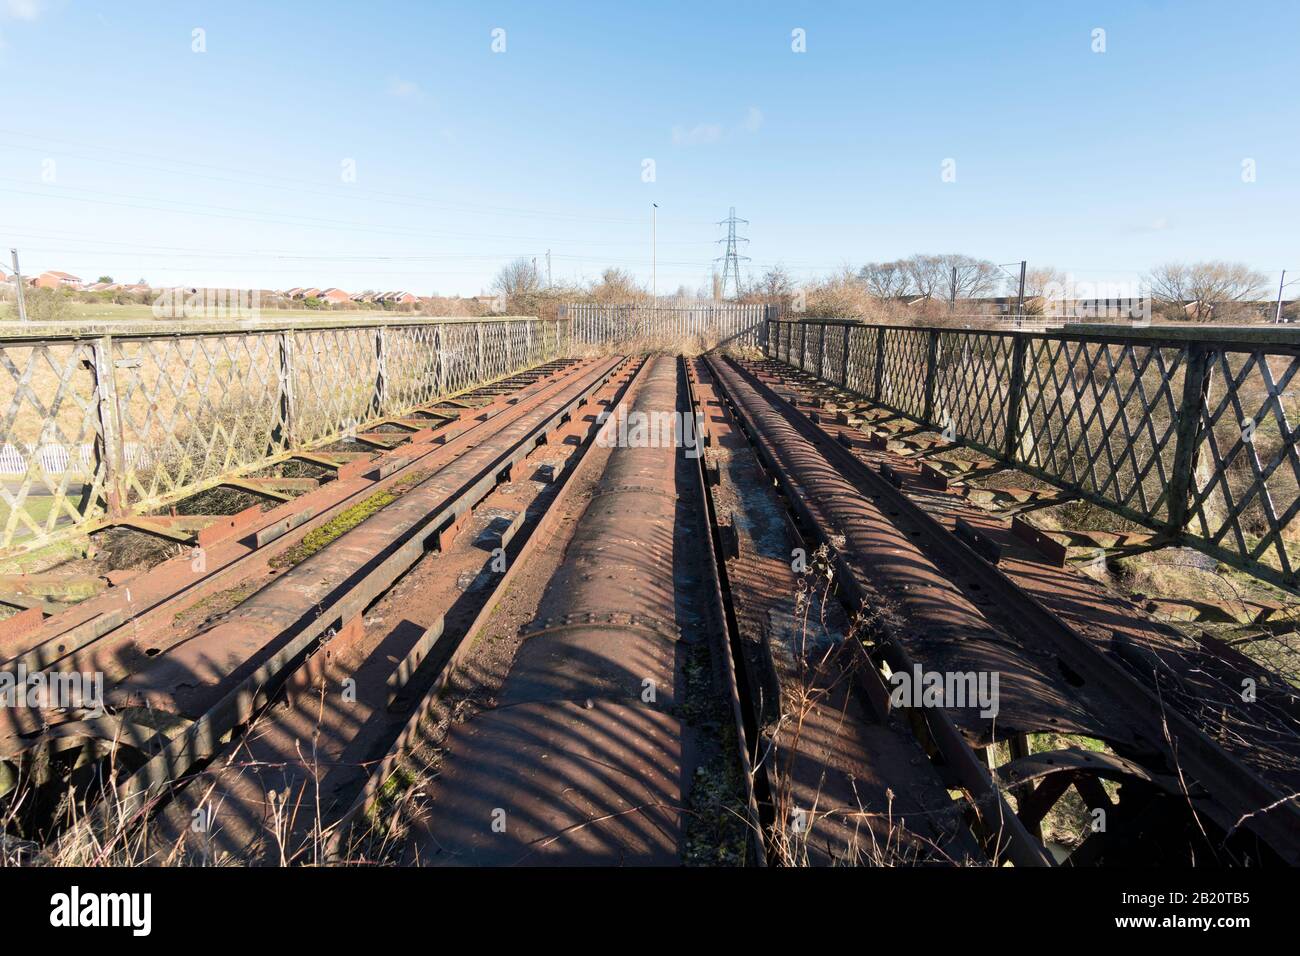 The deck of the old disused Stanhope and Tyne railway bridge over the river Don in Boldon Colliery, Tyne and Wear, England, UK Stock Photo